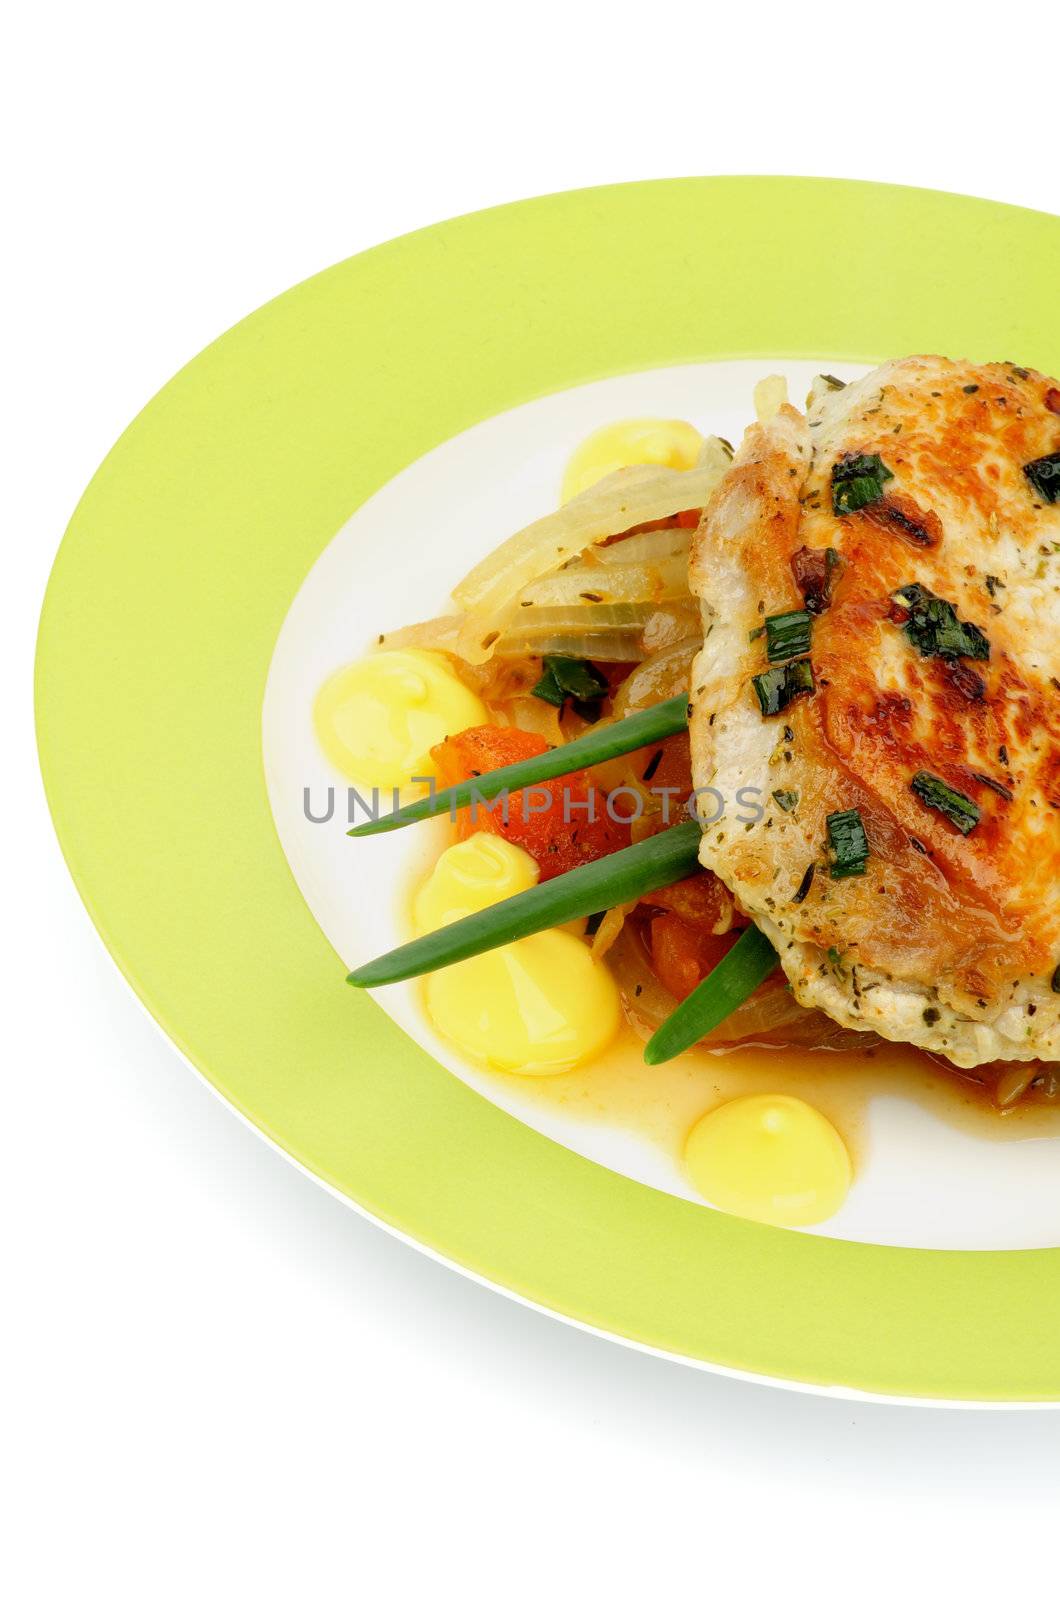 Delicious Pork Chop on Vegetable Saute Garnish with Spring Onion and Cheese Sauce on Green Plate closeup on white background